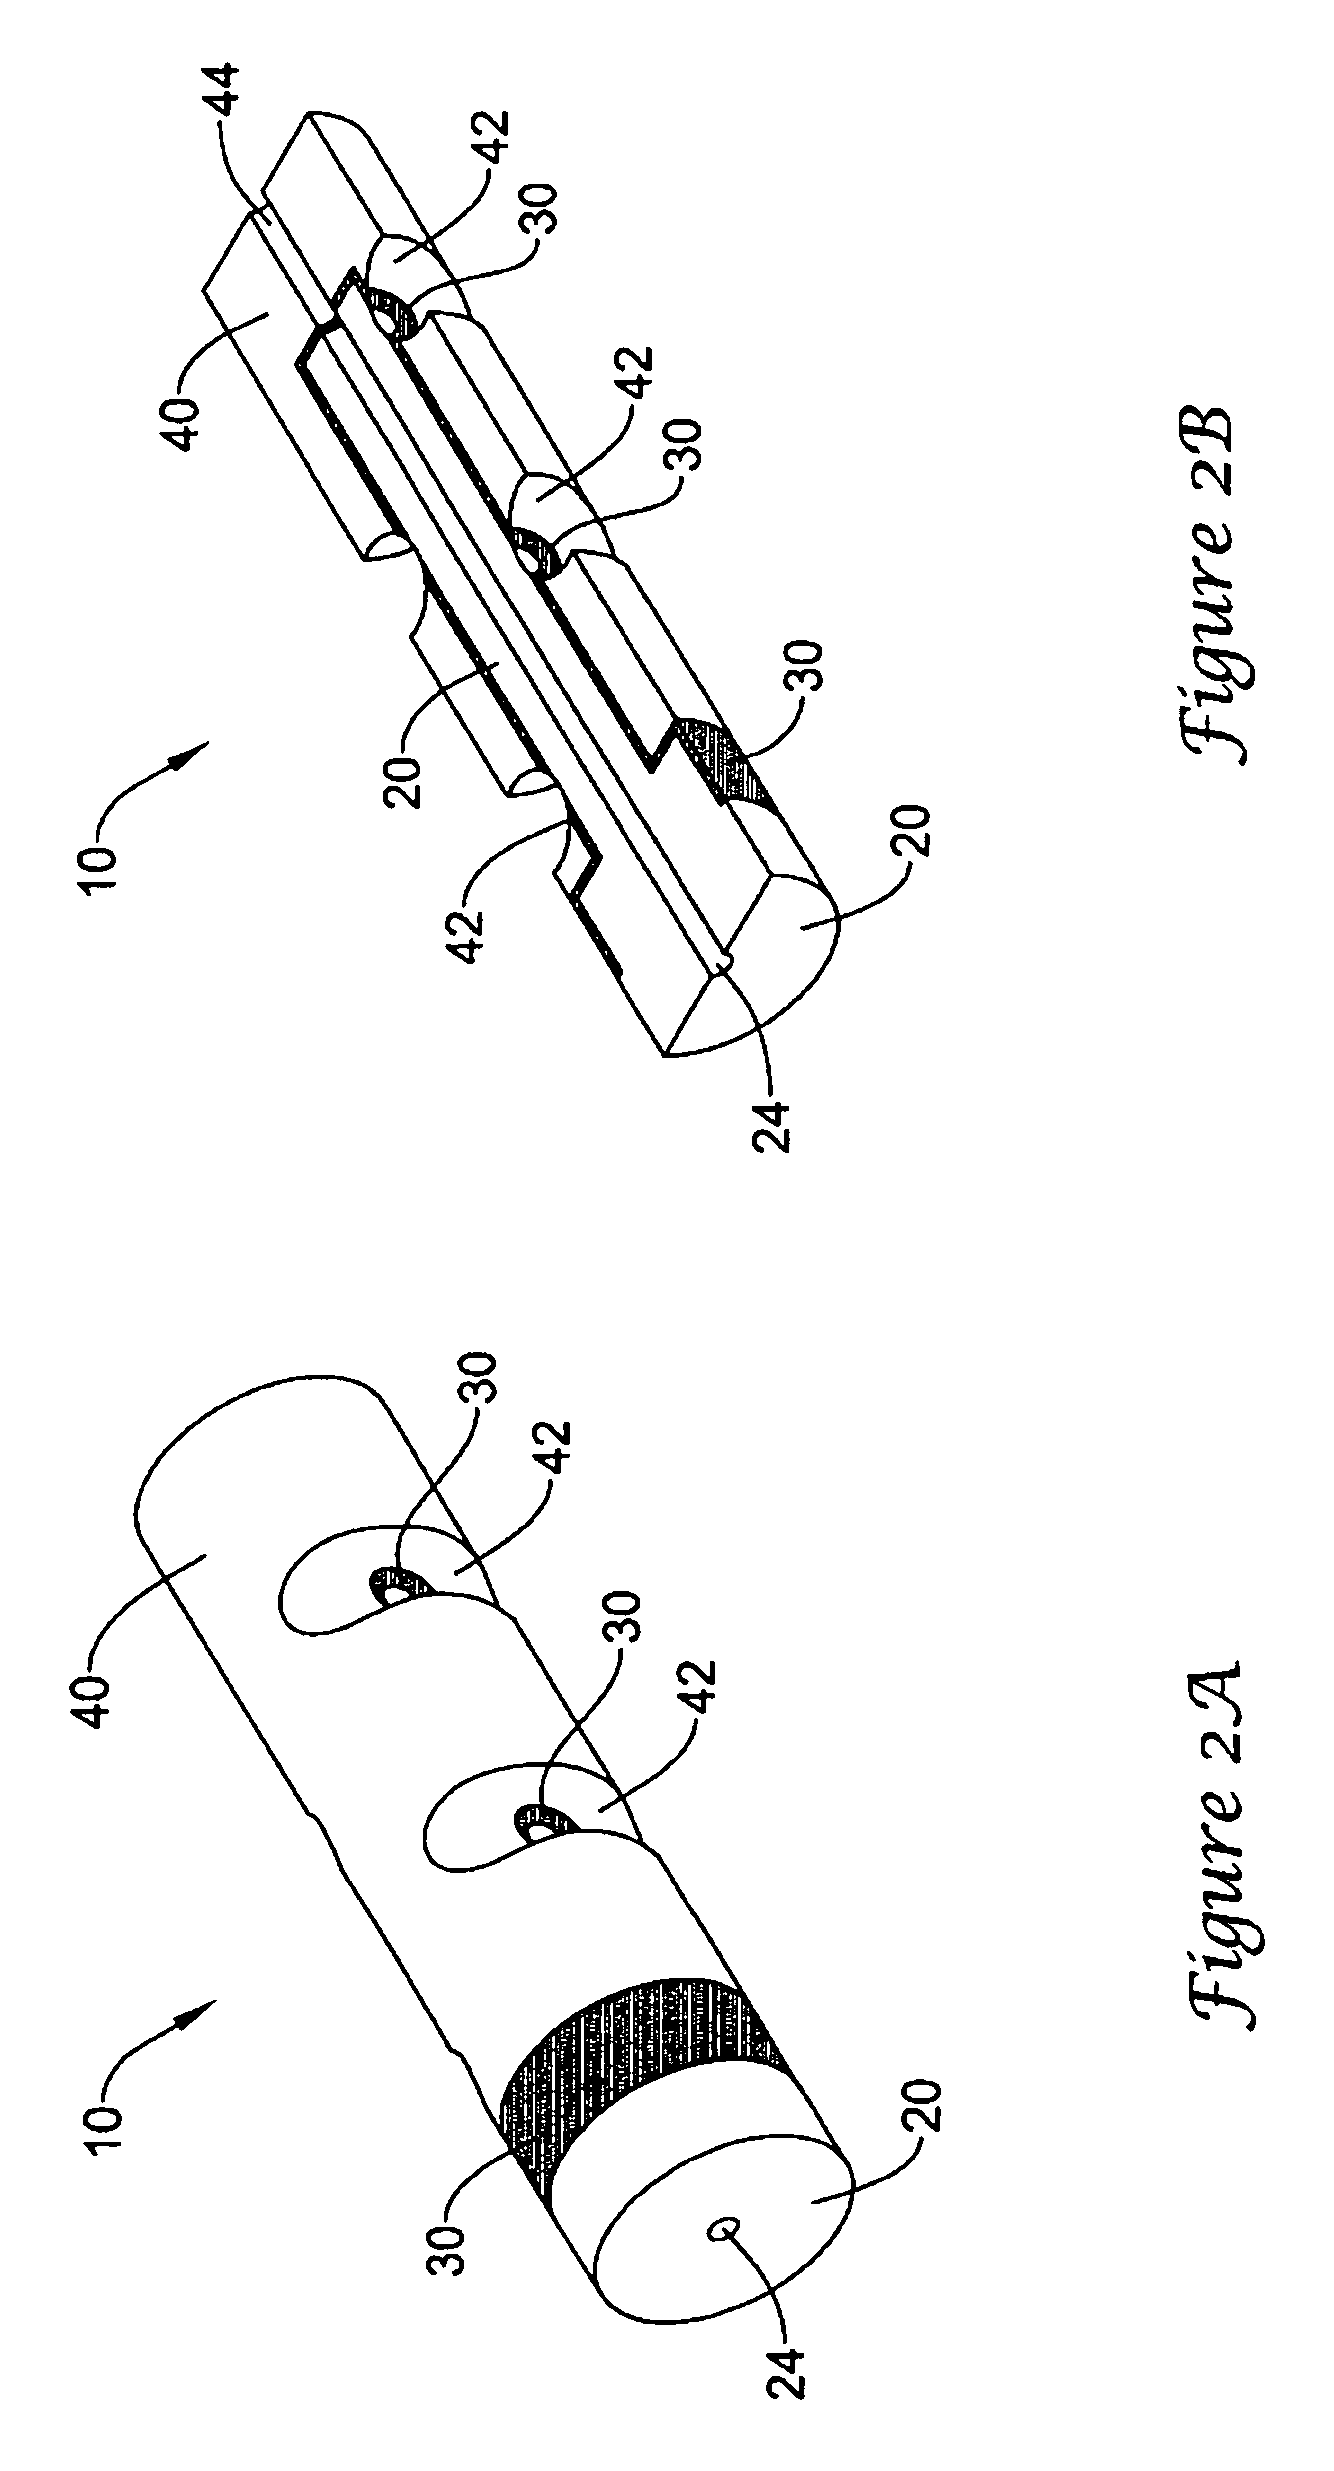 Composite plug for arteriotomy closure and method of use